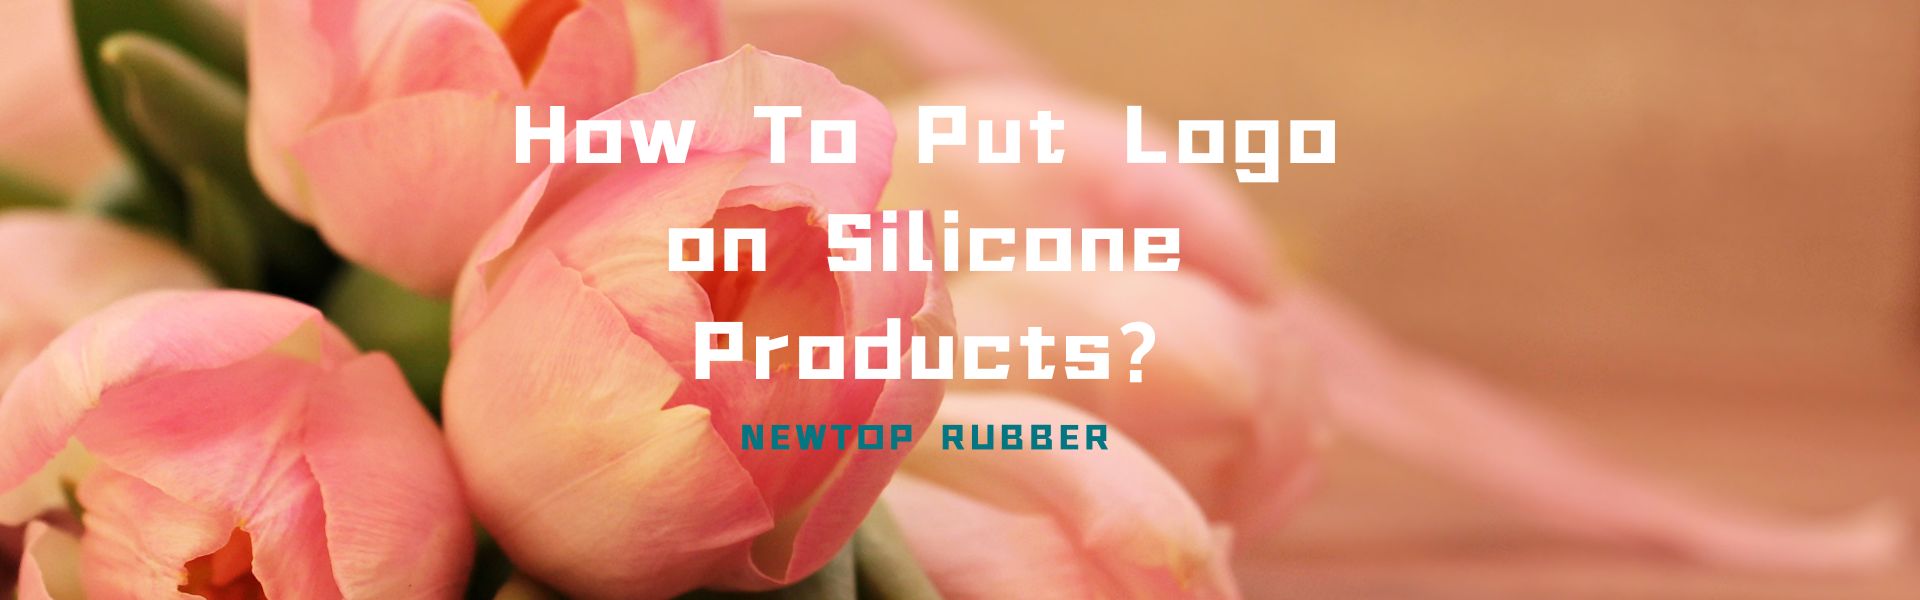 How To Put Logo on Silicone Products?